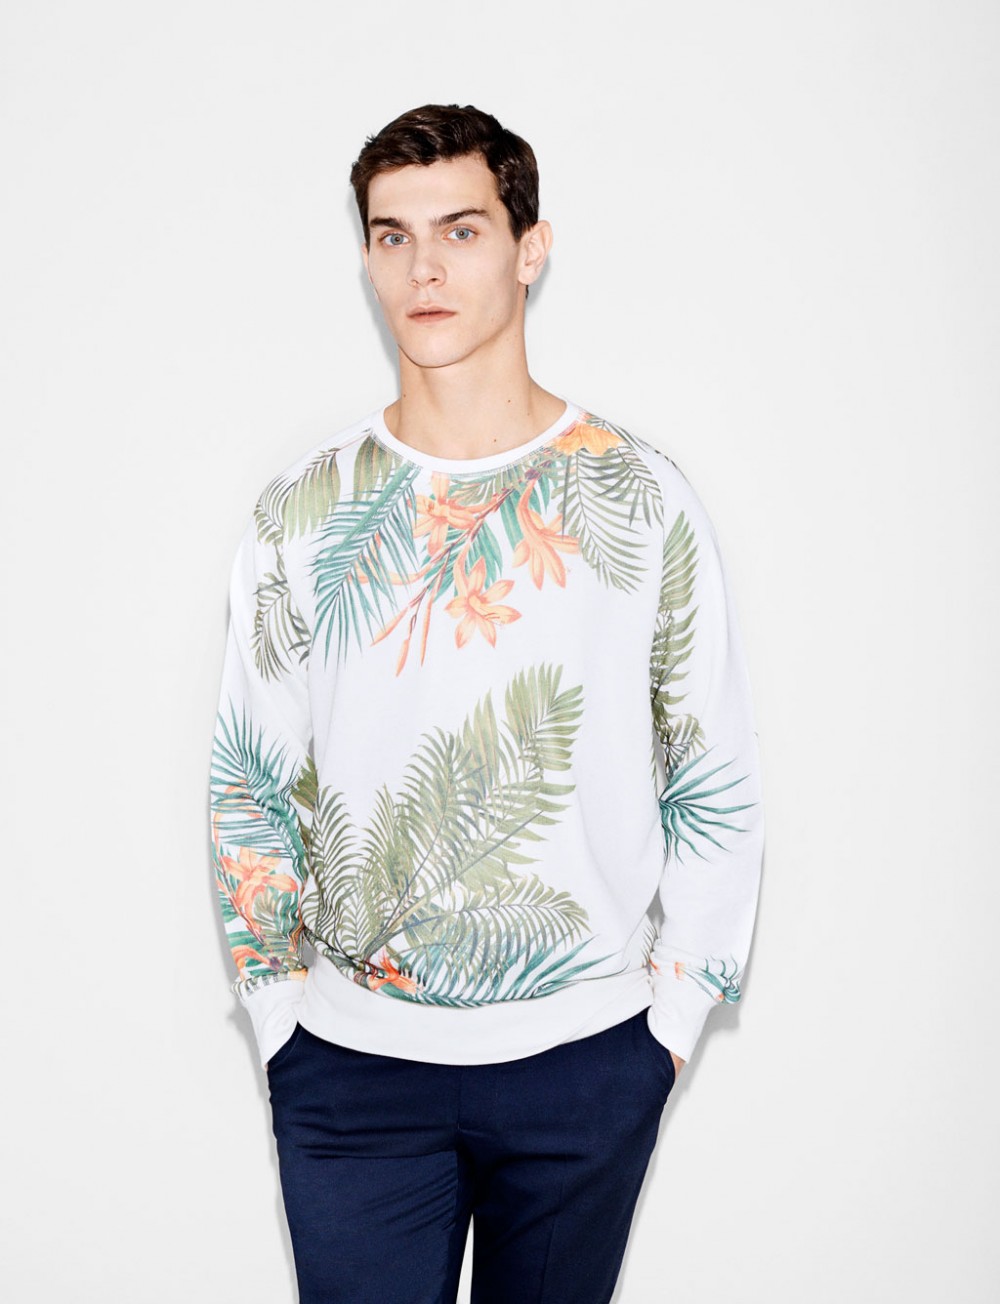 Justin Passmore & Vincent LaCrocq Model Spring Styles for Zara – The ...